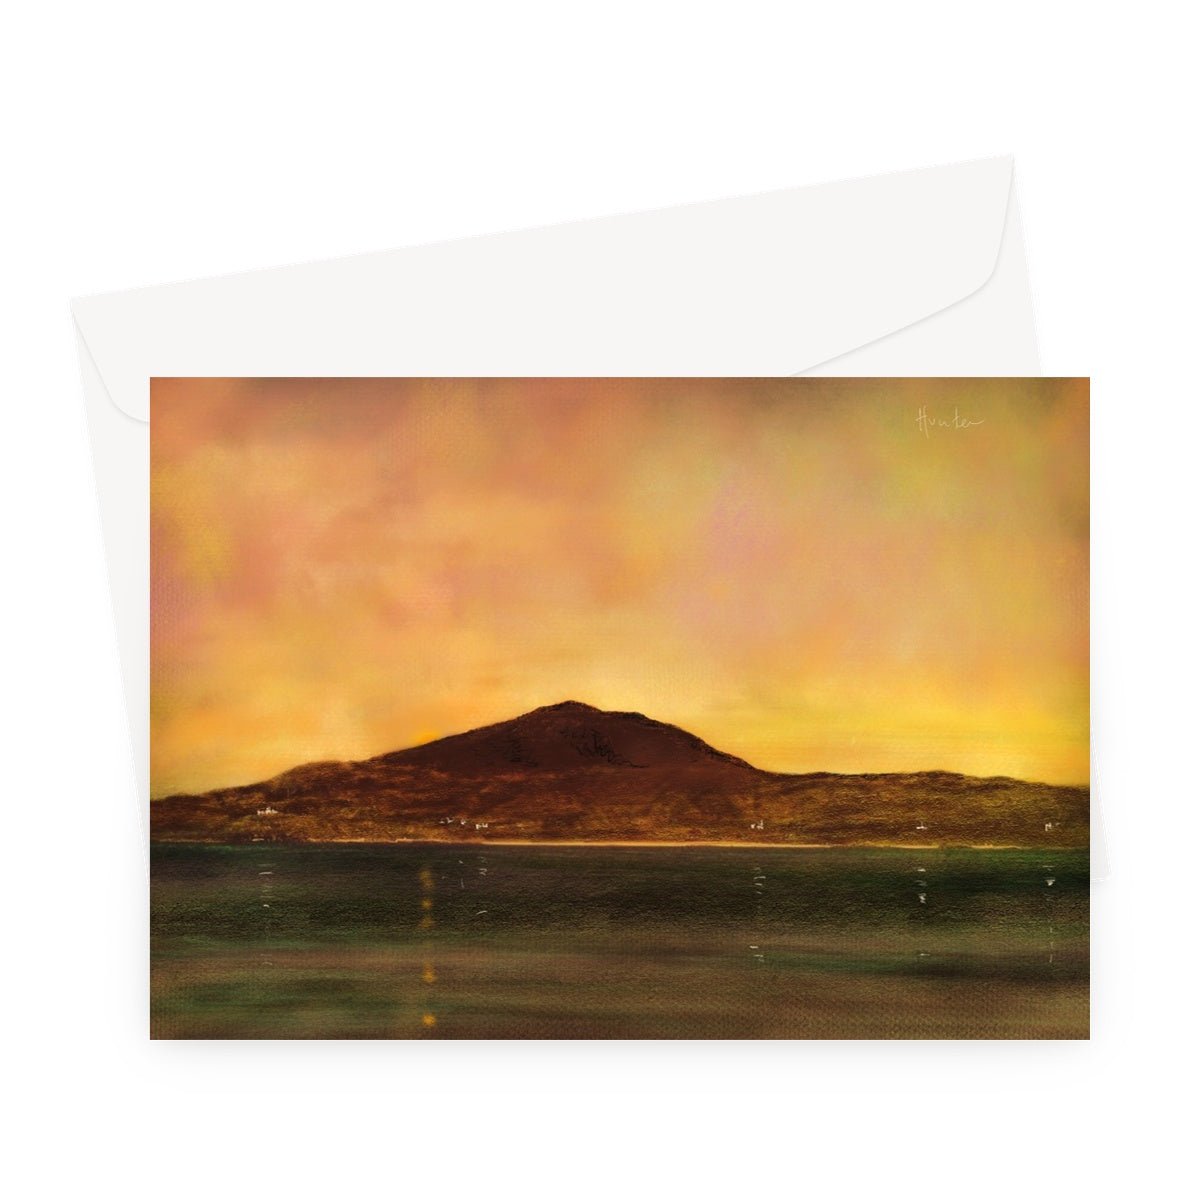 Eriskay Dusk Art Gifts Greeting Card-Greetings Cards-Hebridean Islands Art Gallery-A5 Landscape-10 Cards-Paintings, Prints, Homeware, Art Gifts From Scotland By Scottish Artist Kevin Hunter